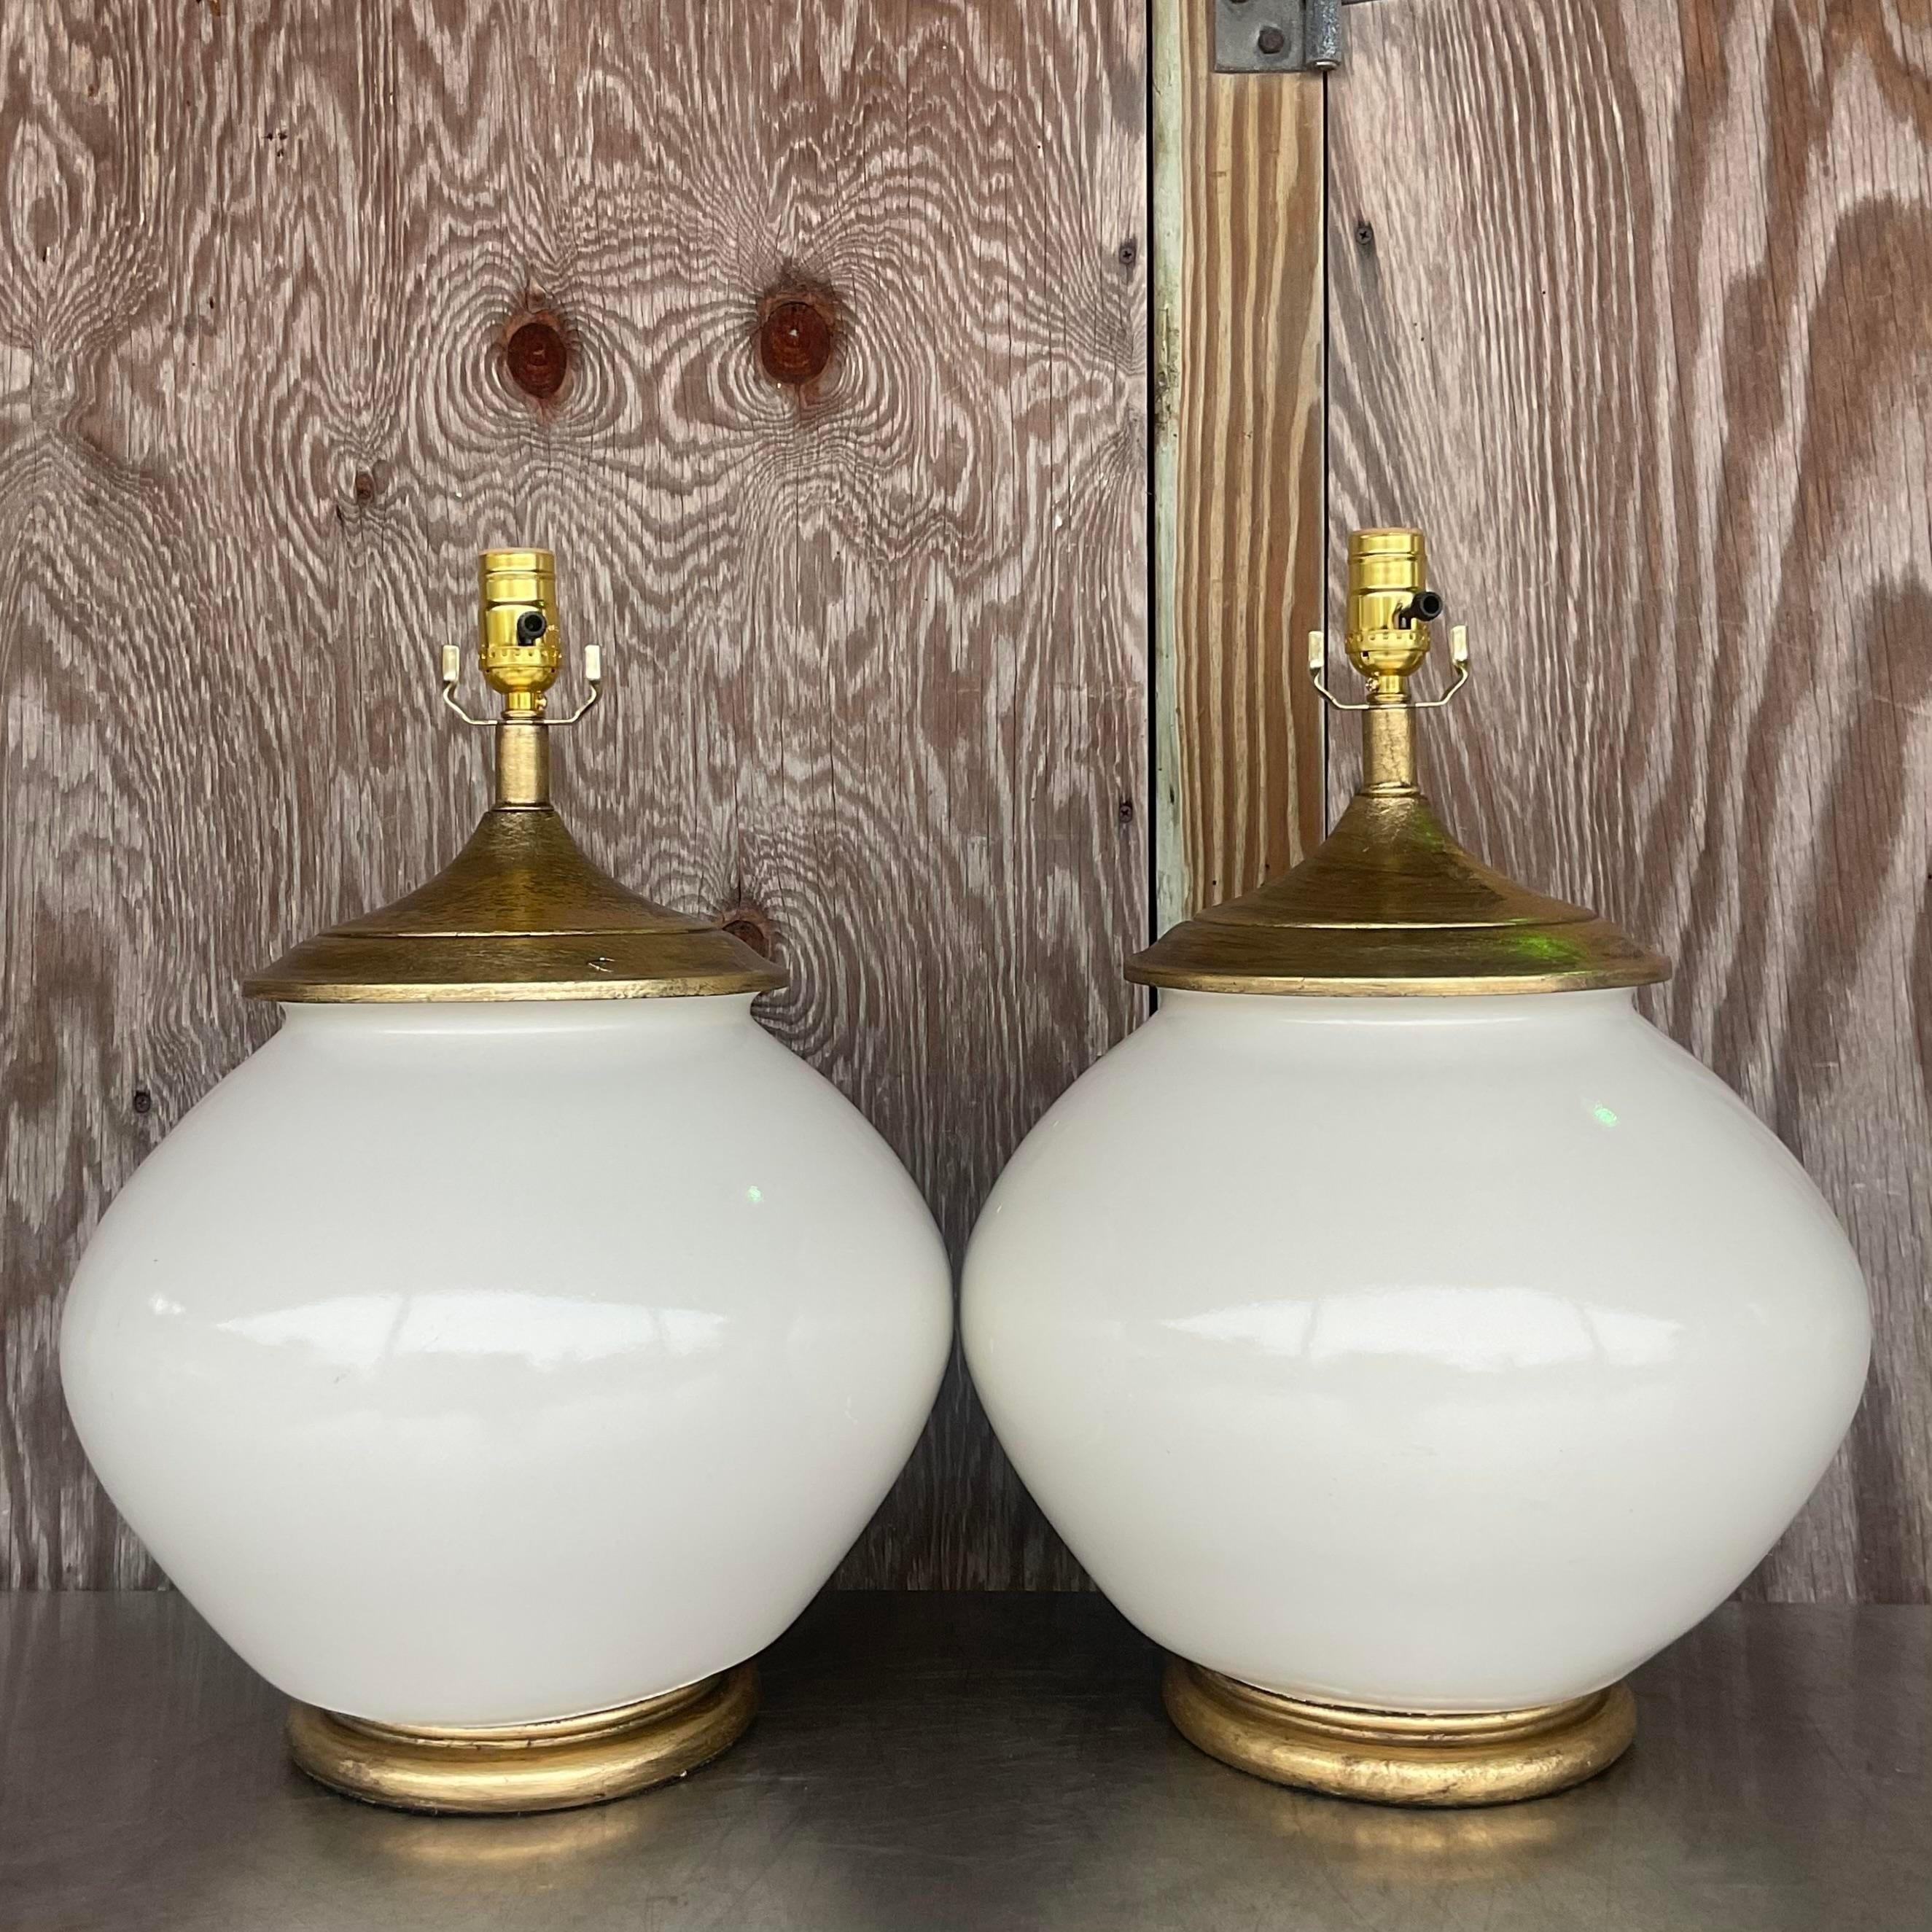 20th Century Vintage Boho Alsy Glazed Ceramic Lamps - a Pair For Sale